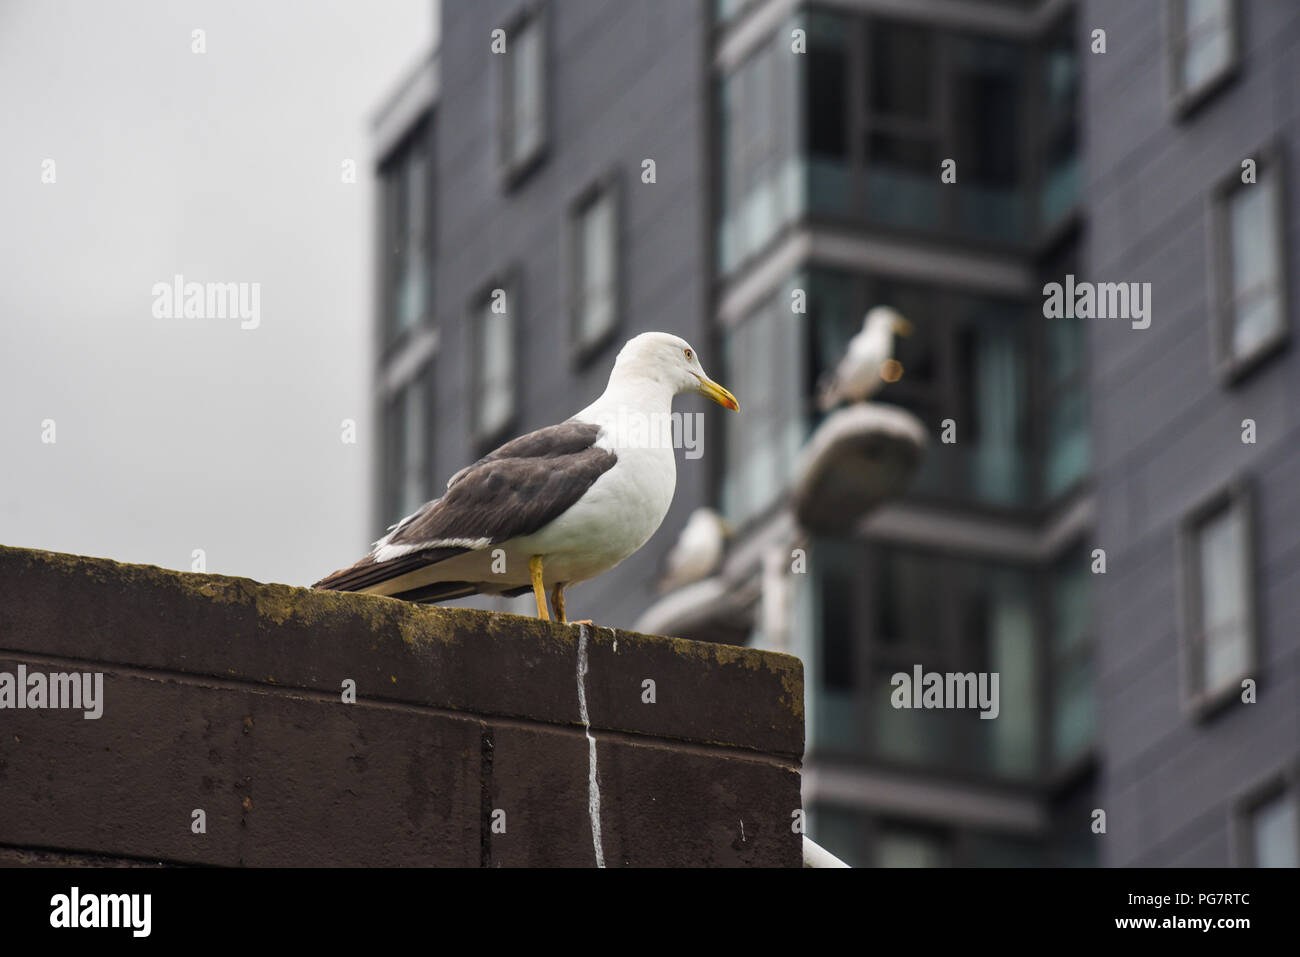 A seagull flies in the city of Glasgow, Scotland Stock Photo